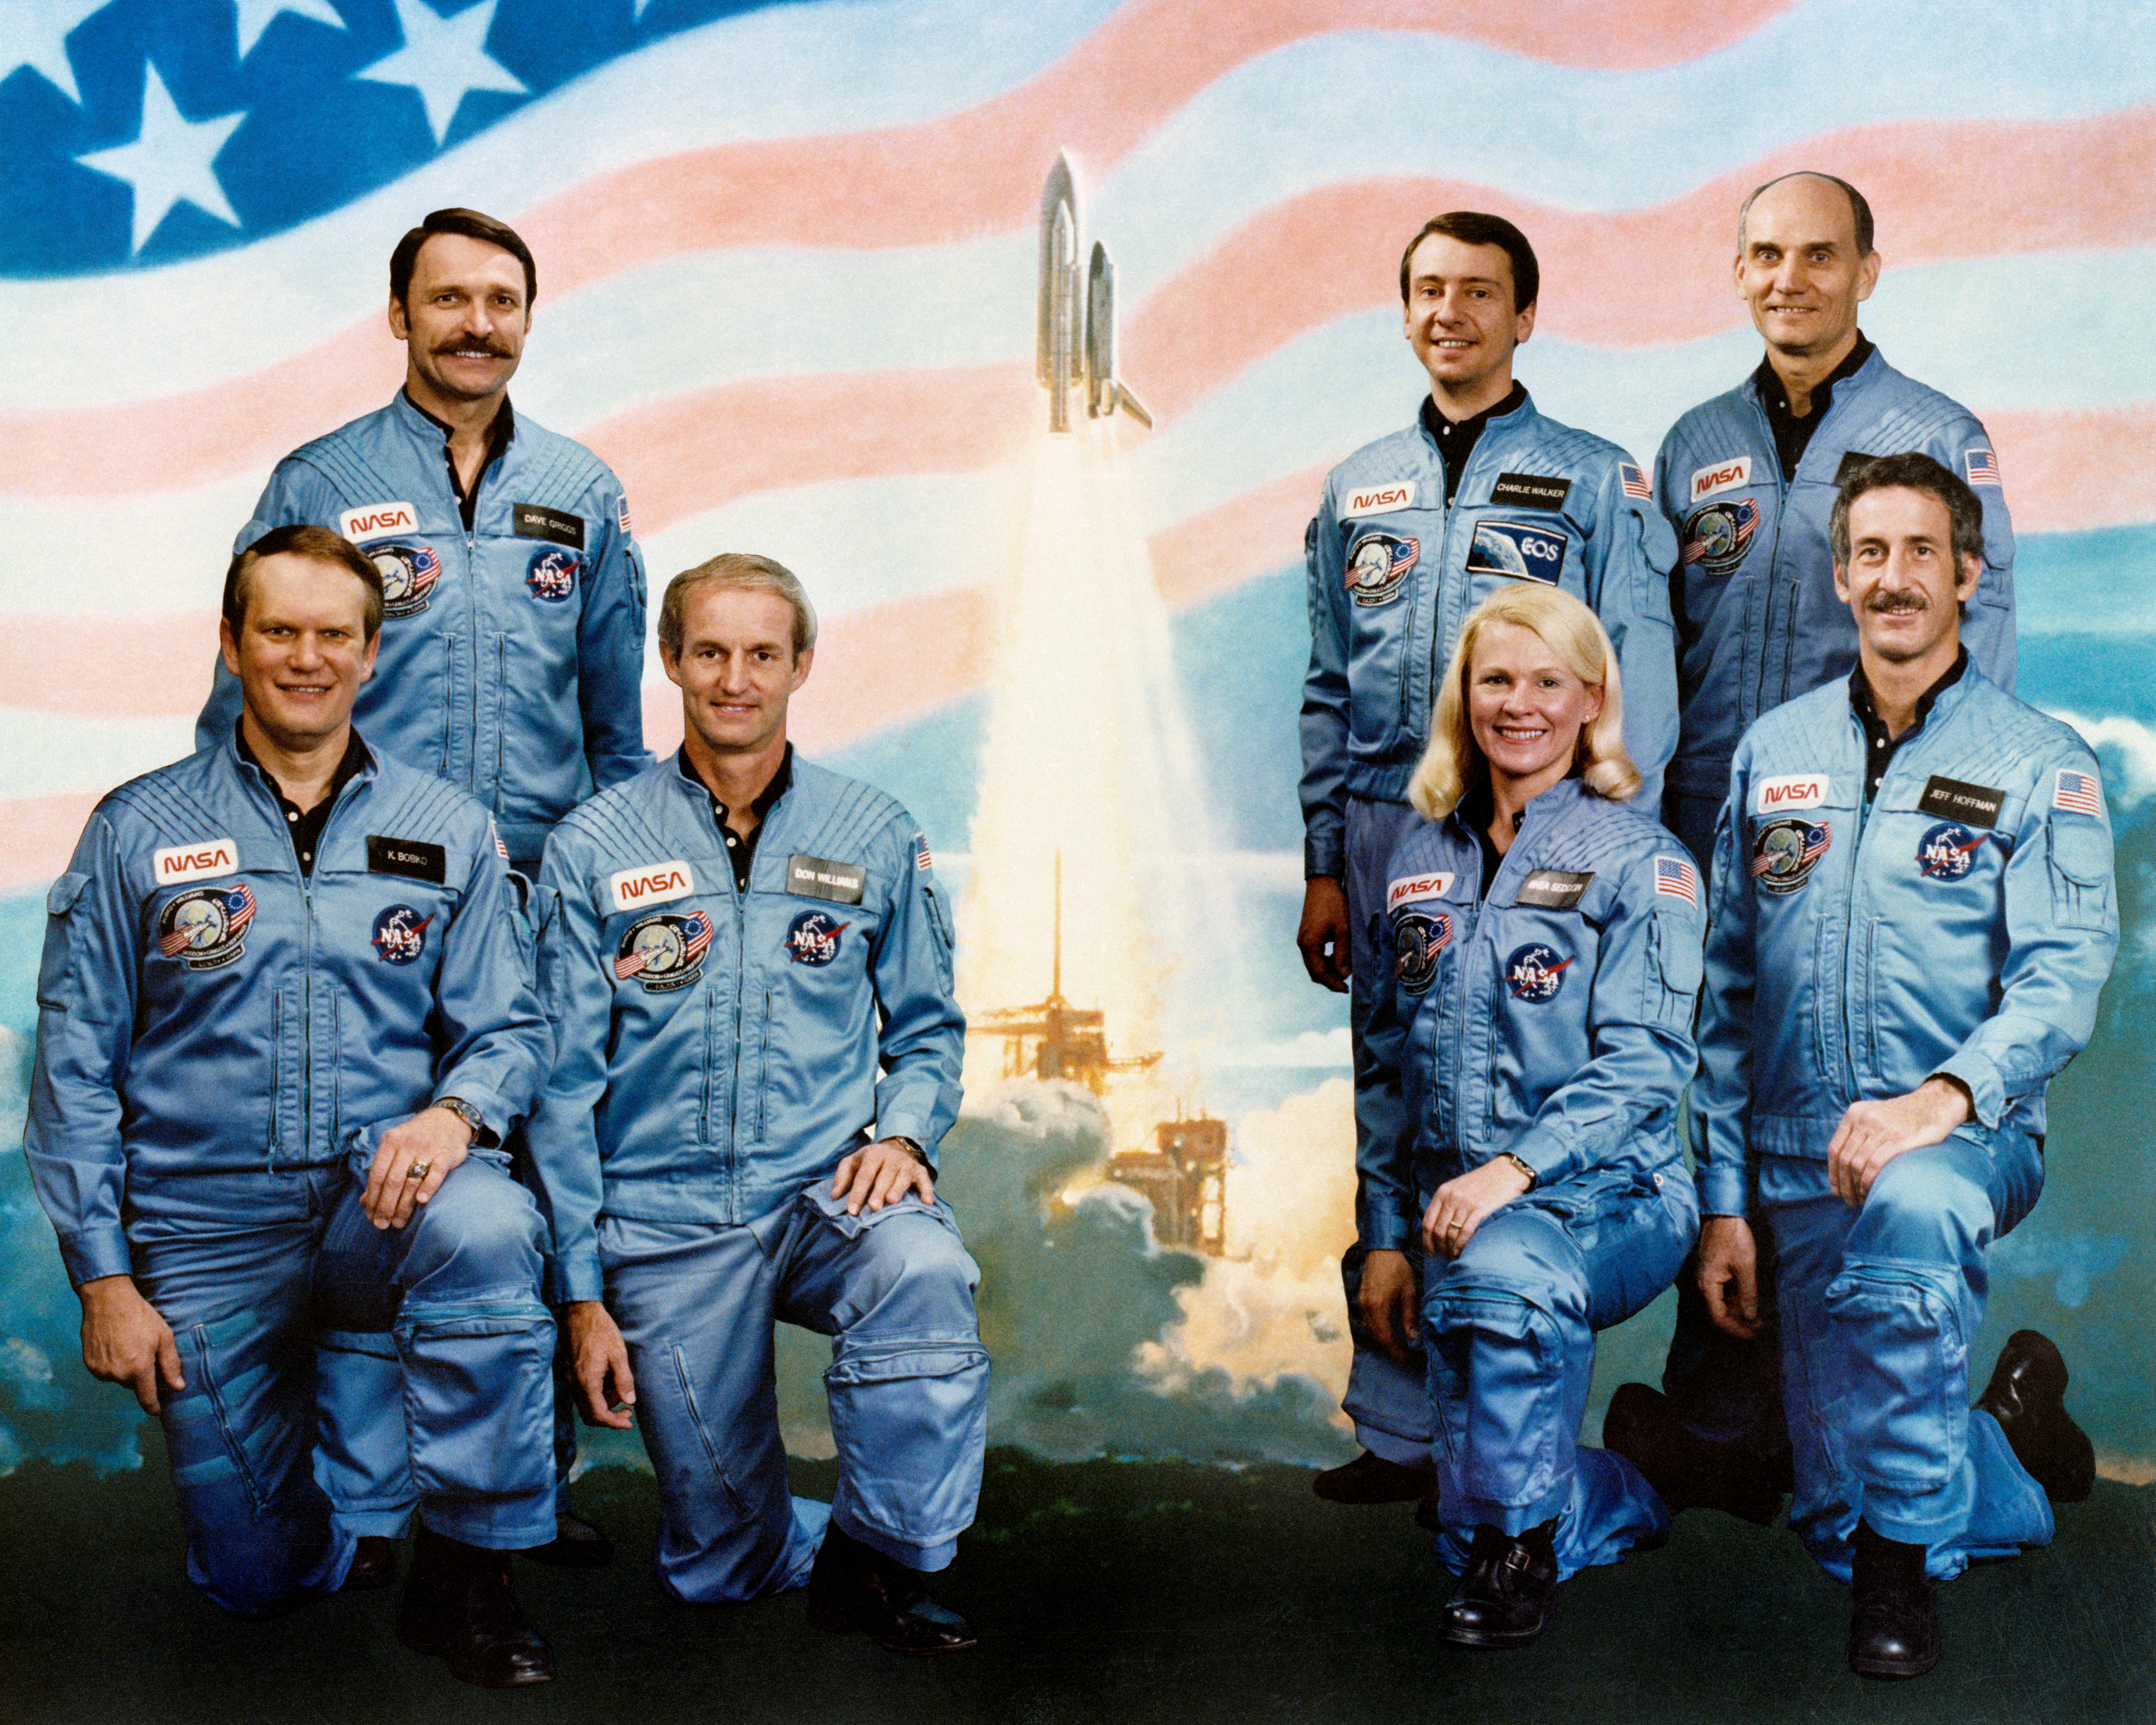 STS-51D Crew Portrait with U.S. flag in the background and an image of a shuttle launch.